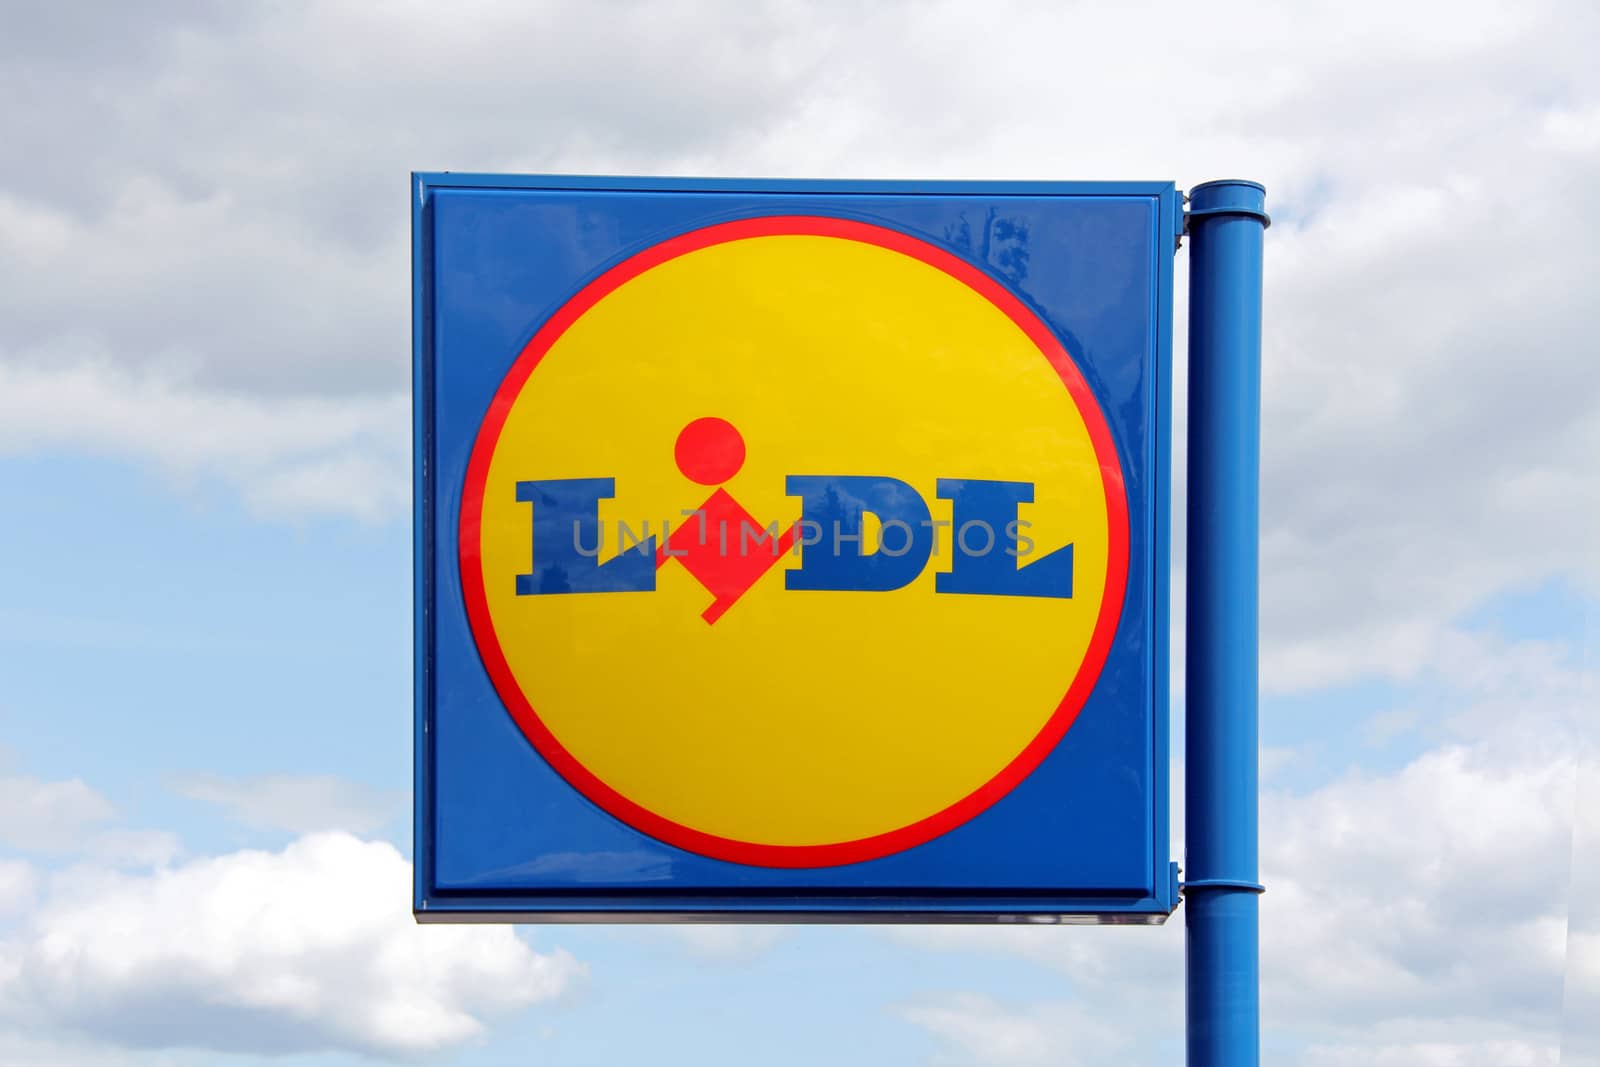 KARKKILA, FINLAND - JULY 13, 2013: Sign Lidl against sky in Karkkila, Finland on July 13, 2013. Lidl Stiftung & Co. KG  is a German global discount supermarket chain, that operates over 10,000 stores across Europe.